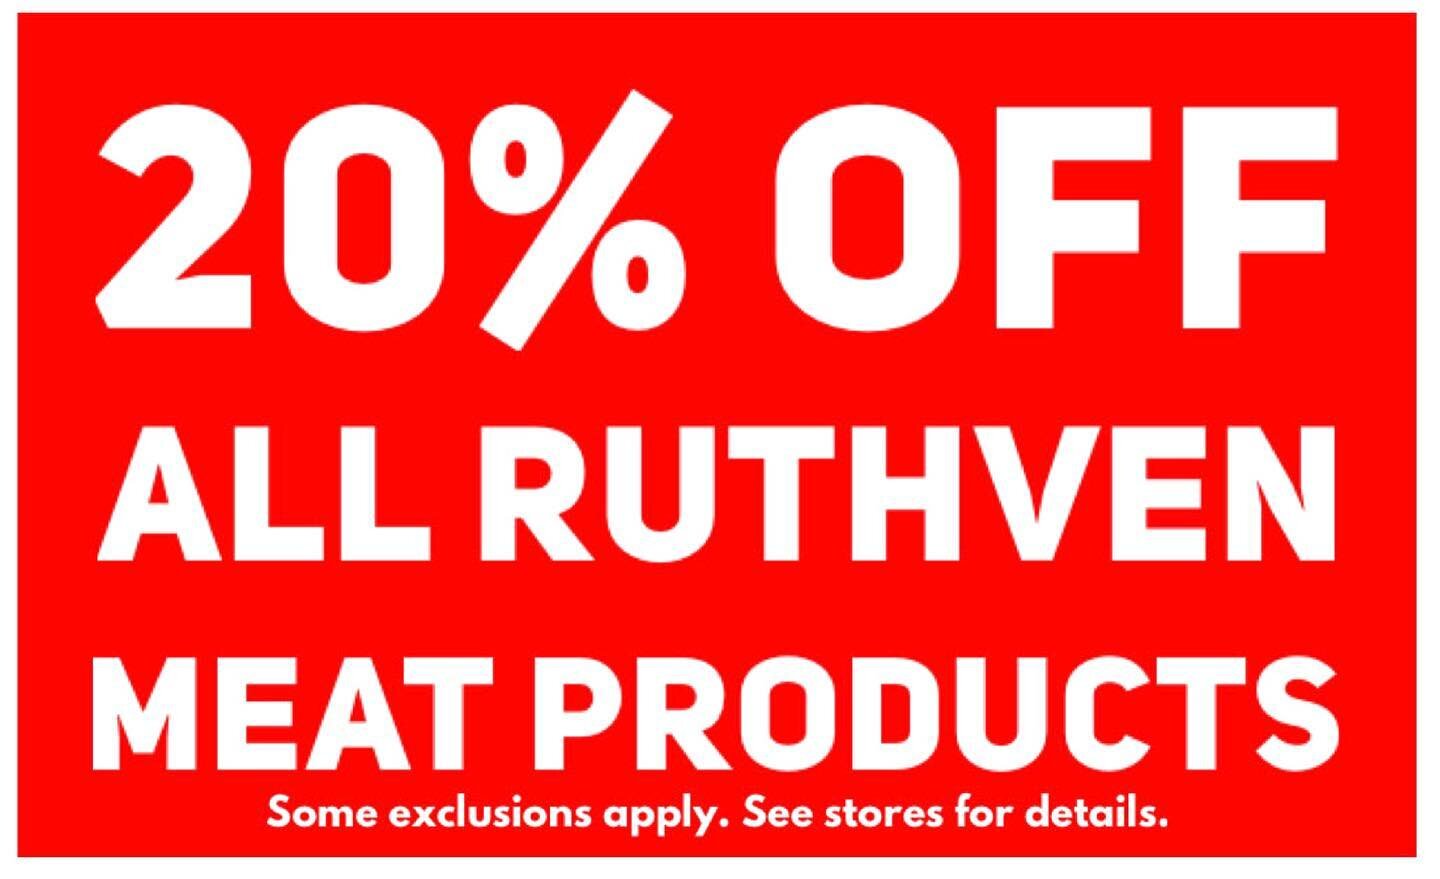 Some Exclusions Apply. 20% off Ruthven Retail Products only. 
No special orders. No rain checks. 
Cannot be combined with any other offer or coupon. 
Offer good through 6/5/22. See store for details